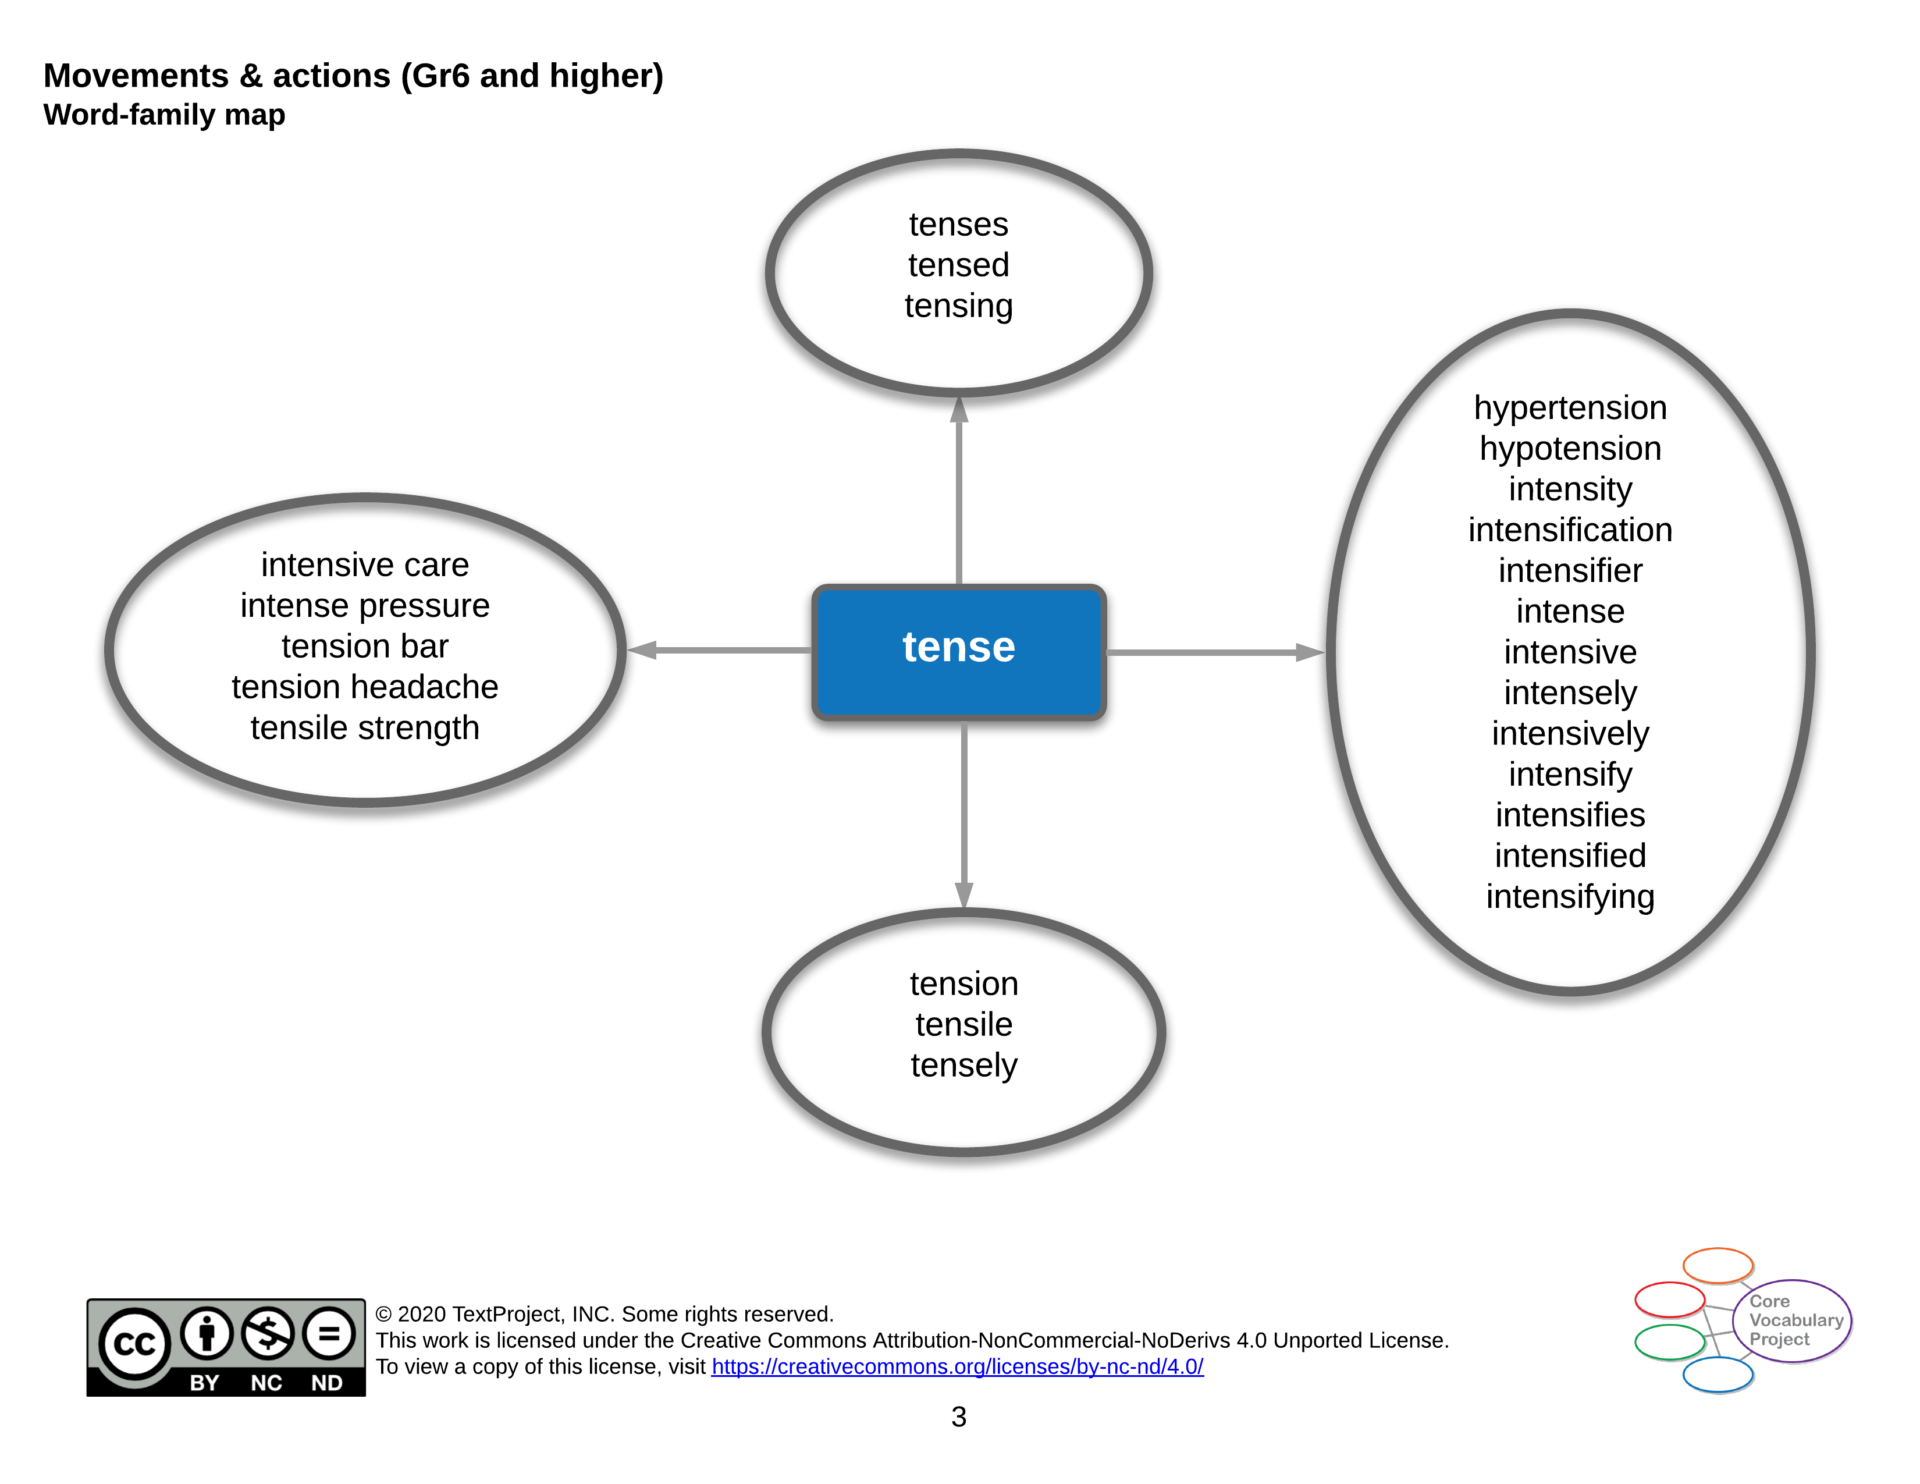 Movements-actions-CPV-Gr6-higher-tense.png